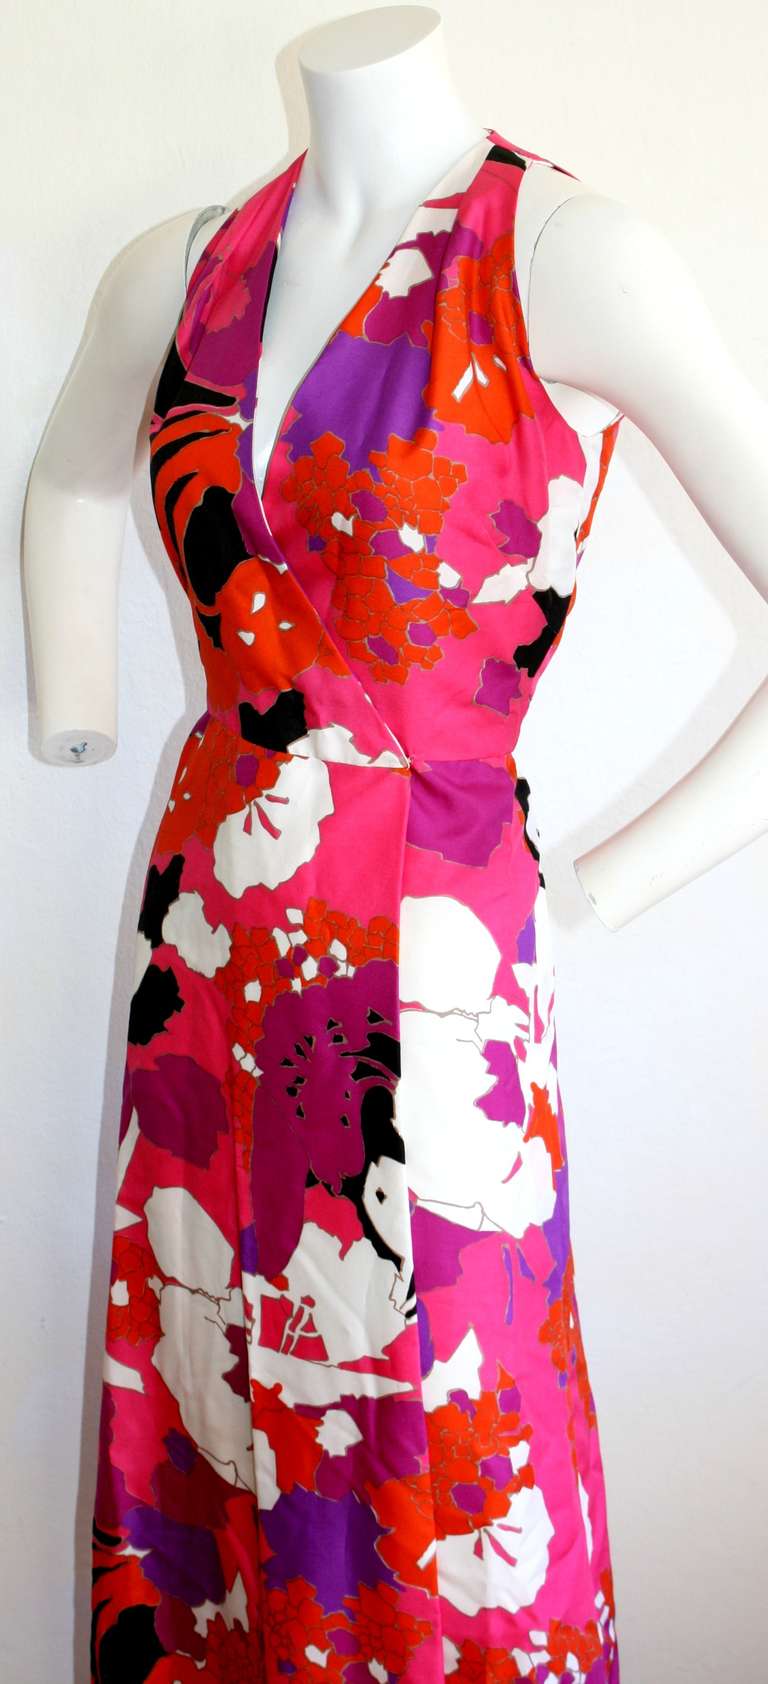 Vintage 1970s Adele Simpson Maxi wrap dress, with fuchsia, purple, black and white beautiful Oriental style floral abstract print. Fully lined. Size Medium